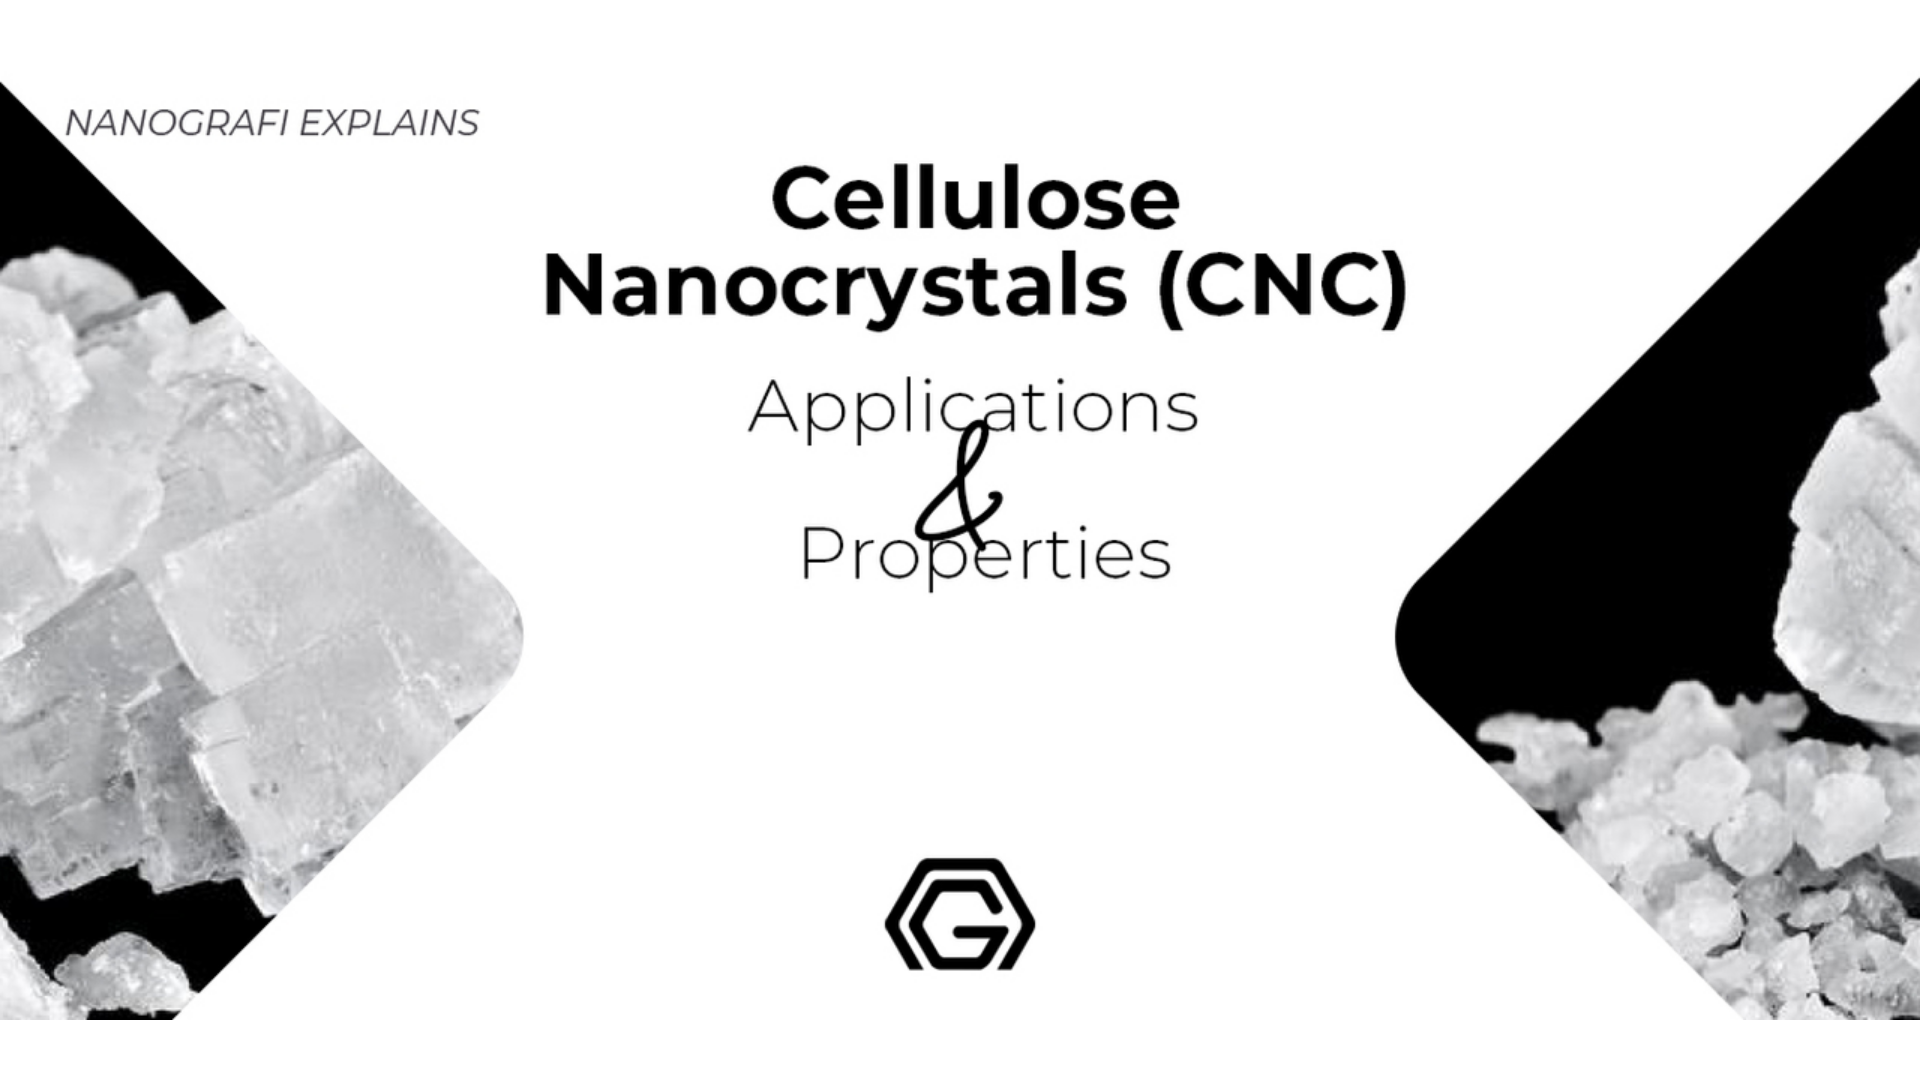 Applications & properties of Cellulose Nanocrystals (CNC)